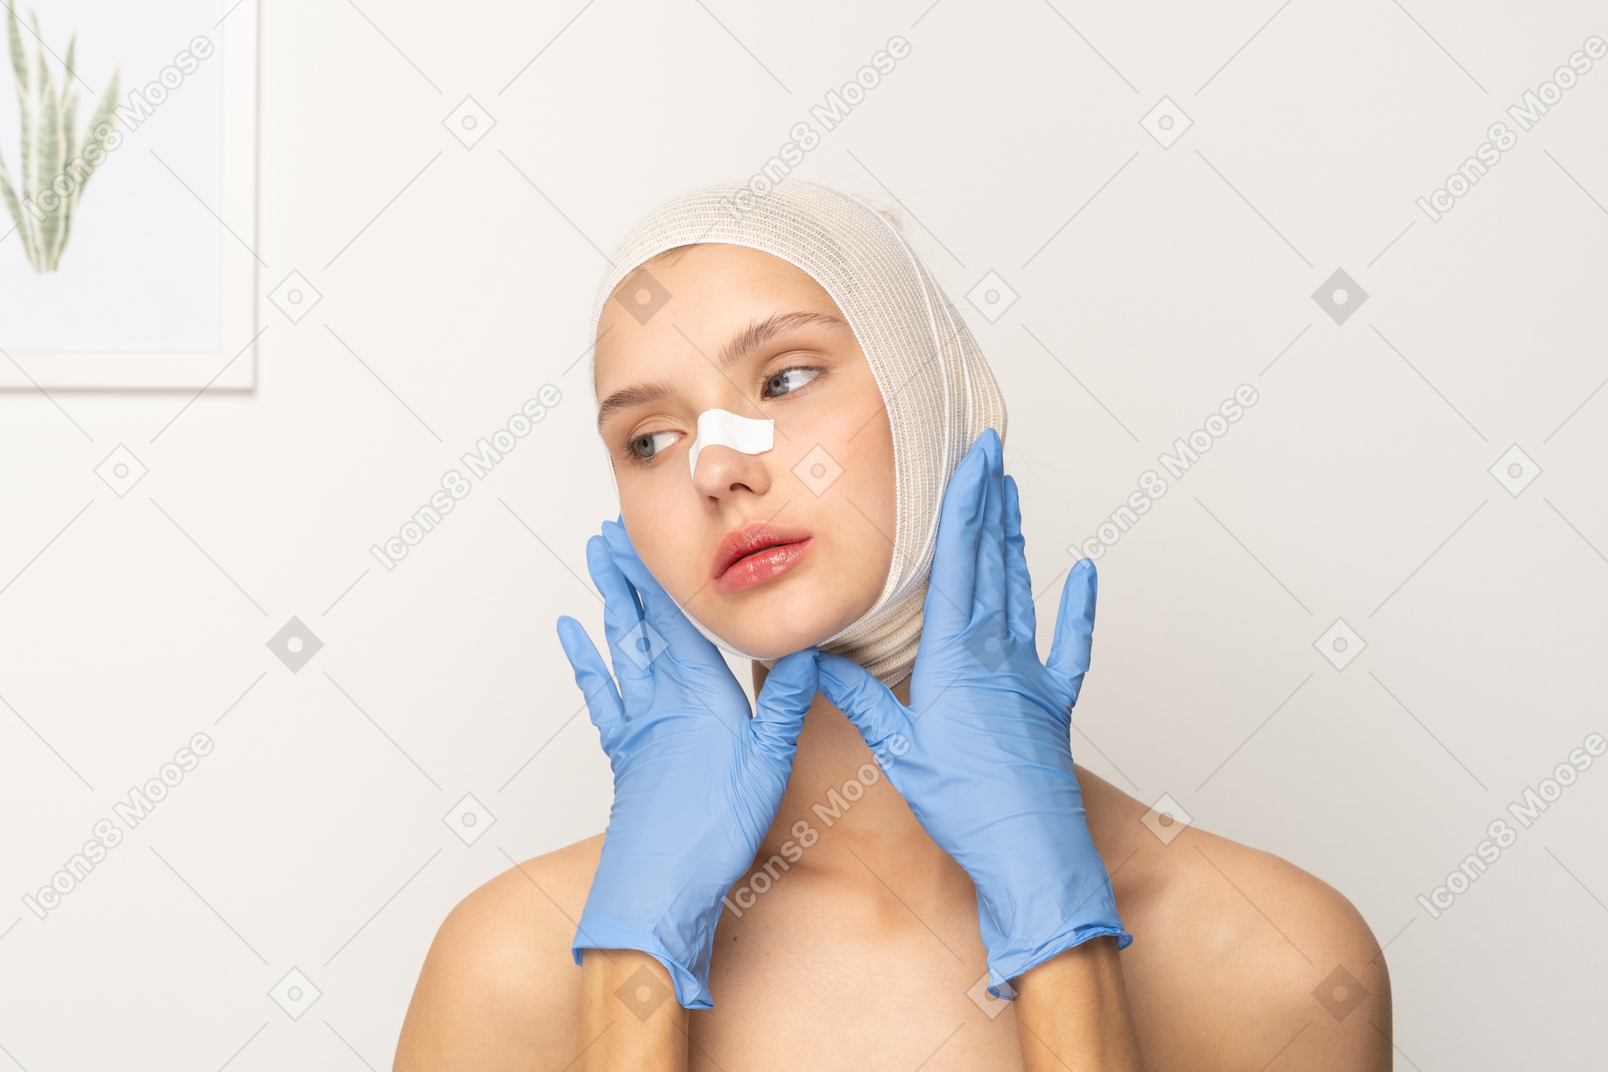 Female patient with gloved hands framing her face